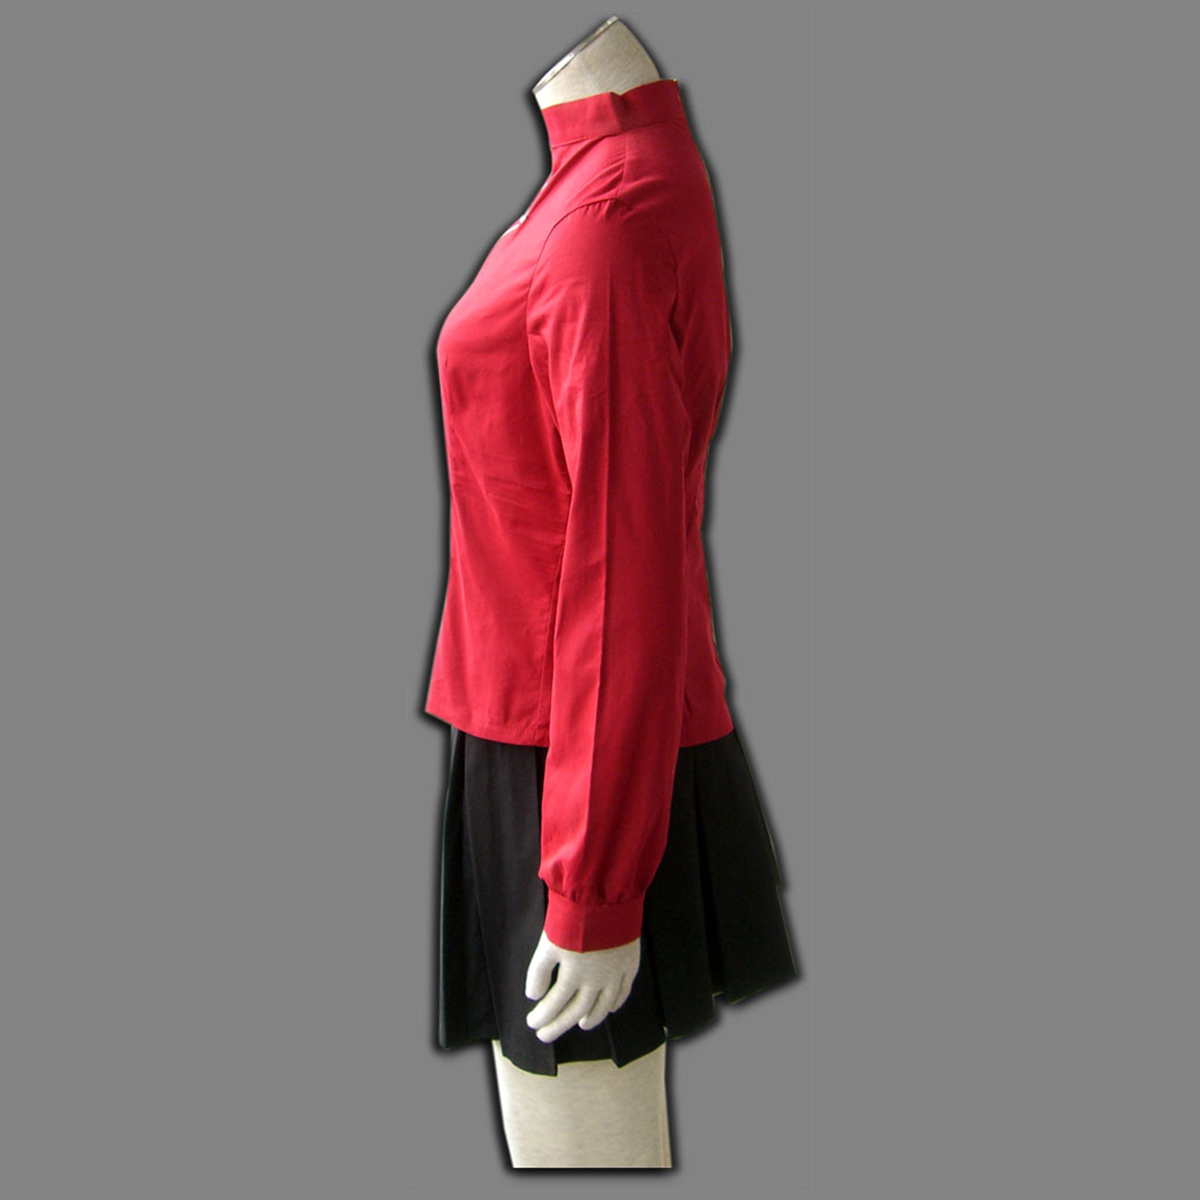 The Holy Grail War Tohsaka Rin 1 Anime Cosplay Costumes Outfit